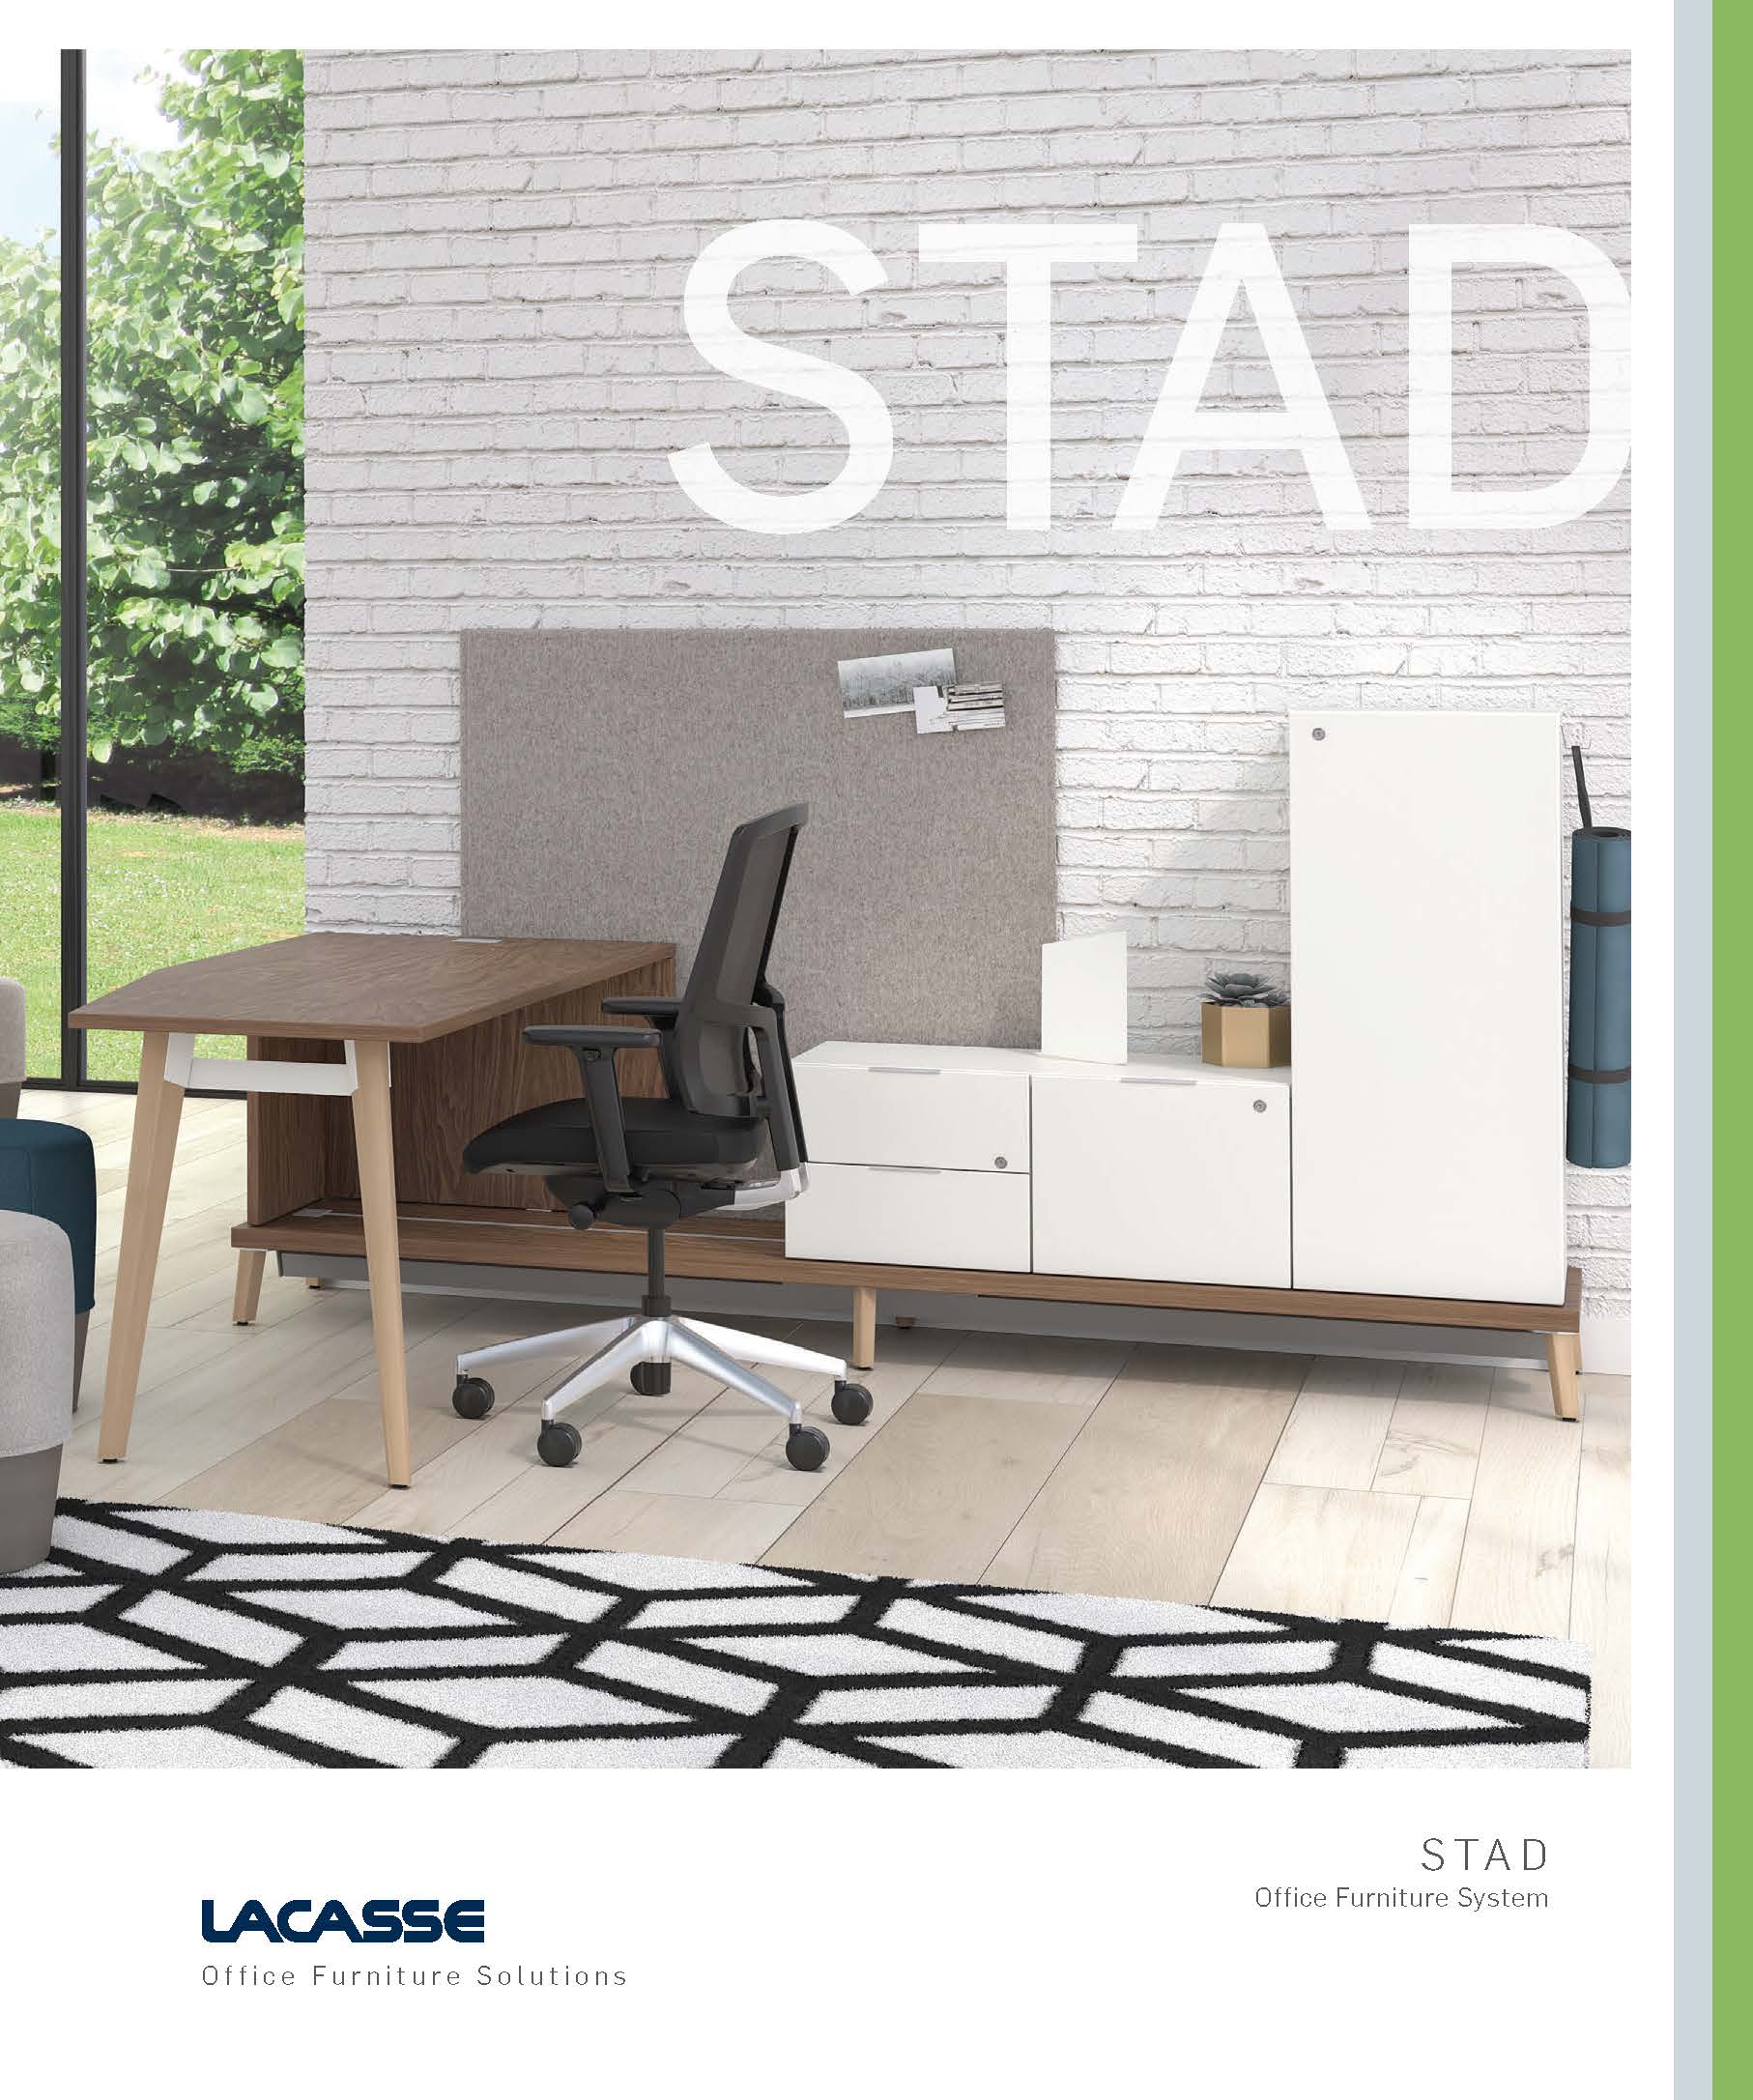 Groupe Lacasse Catalog_Stad Cover